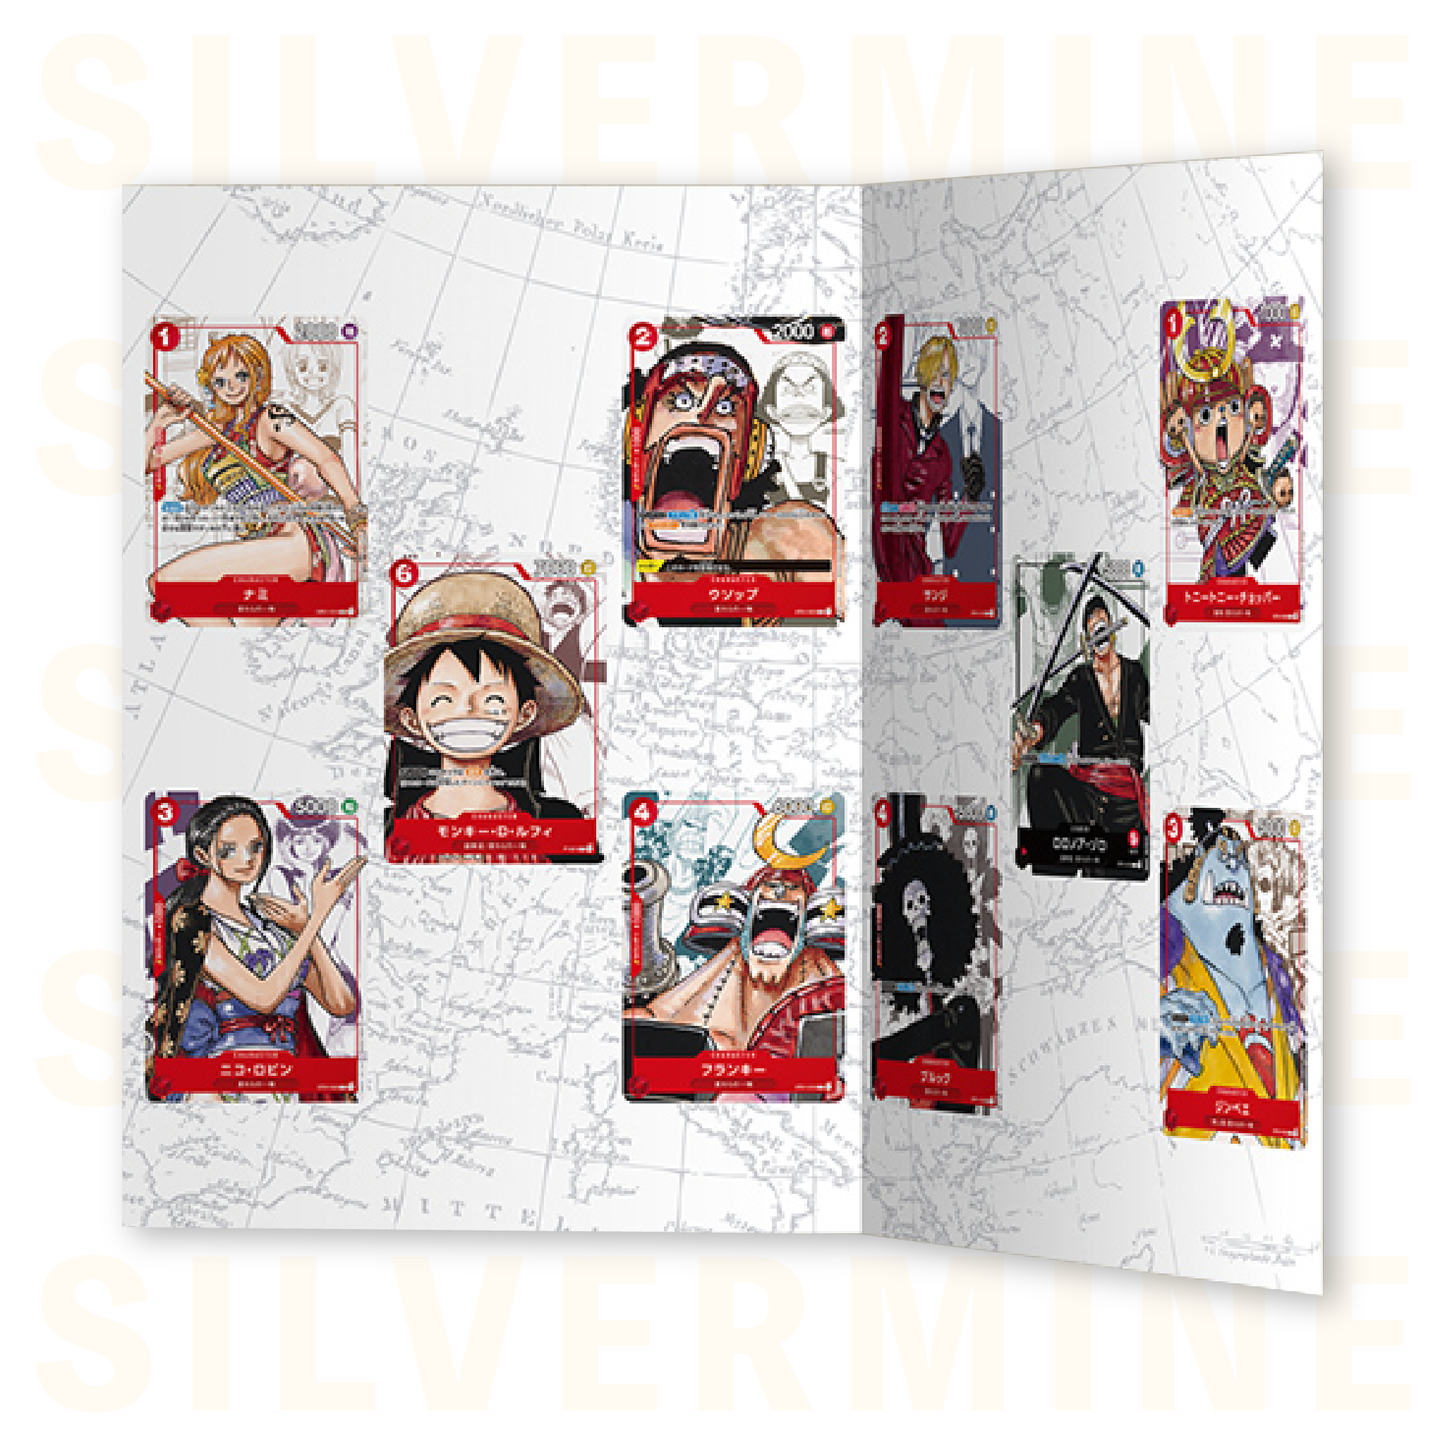 One Piece - Premium Card Collection - 25th Anniversary Edition